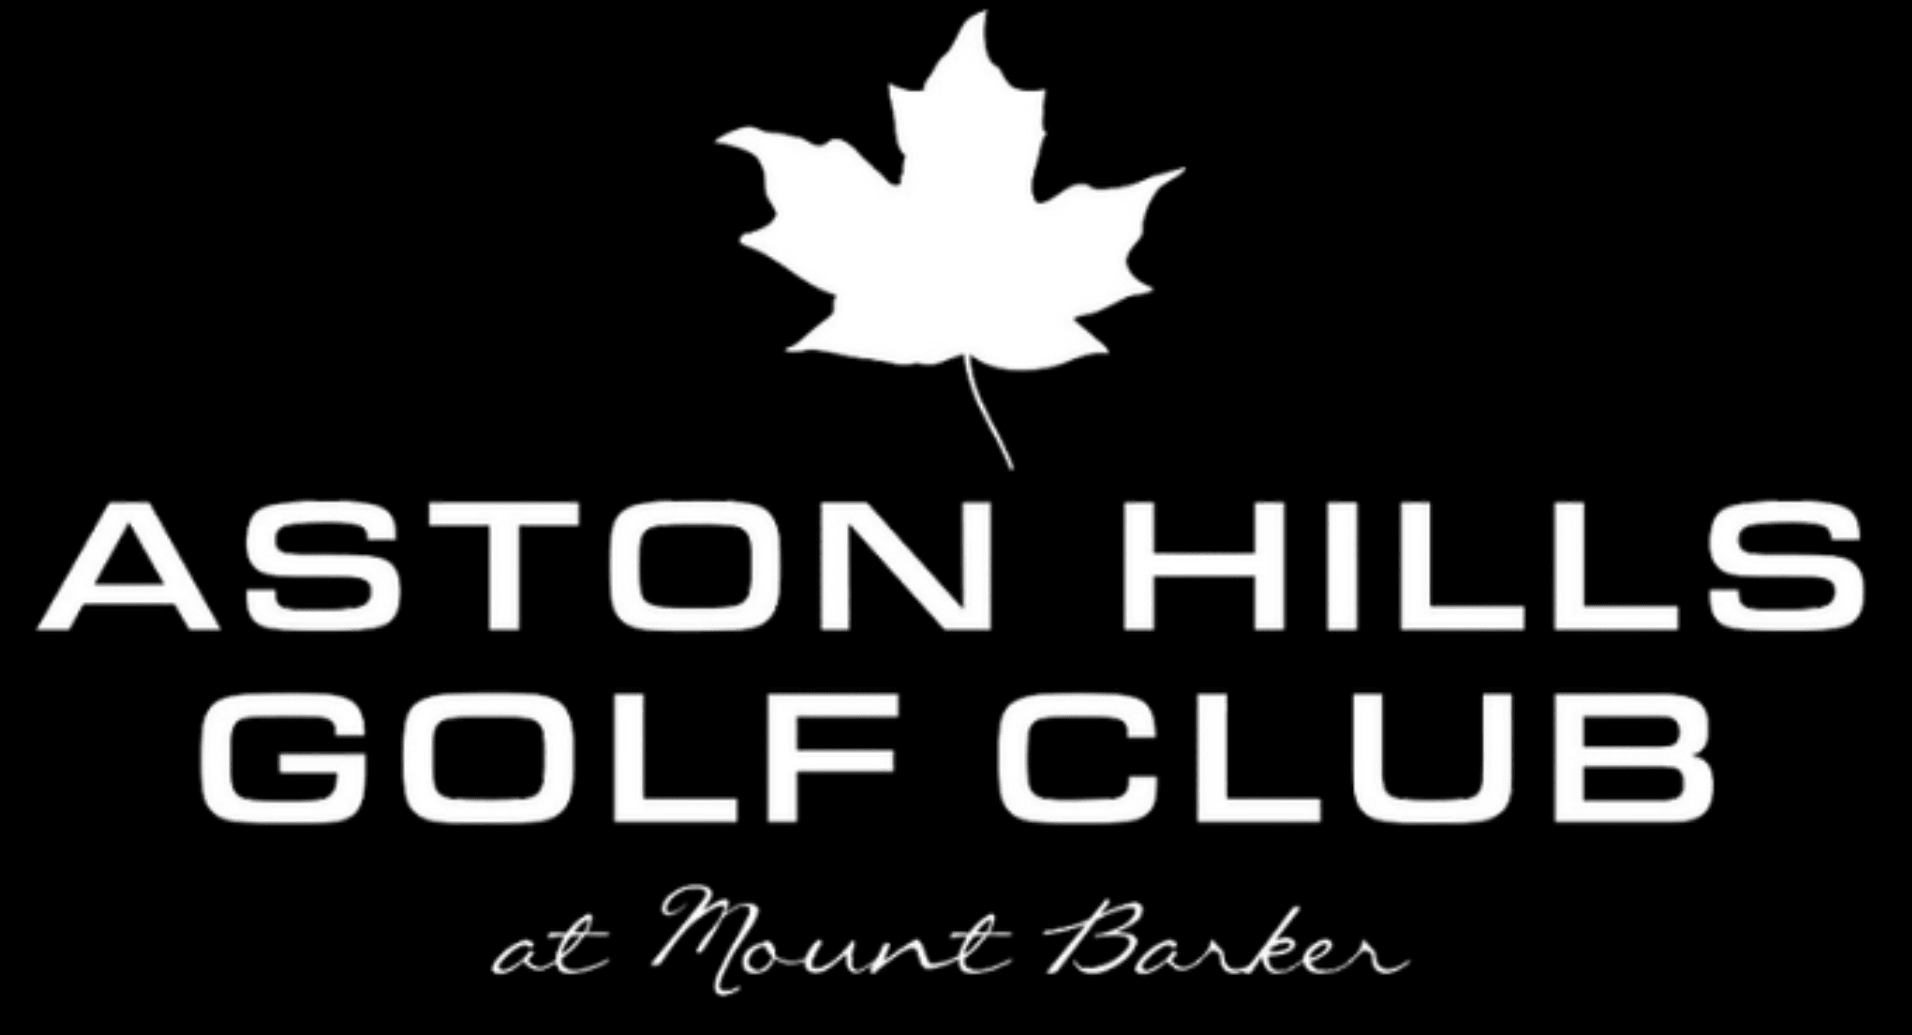 Enjoy one of our beers at Aston Hills Golf Club in Mount Barker SA.